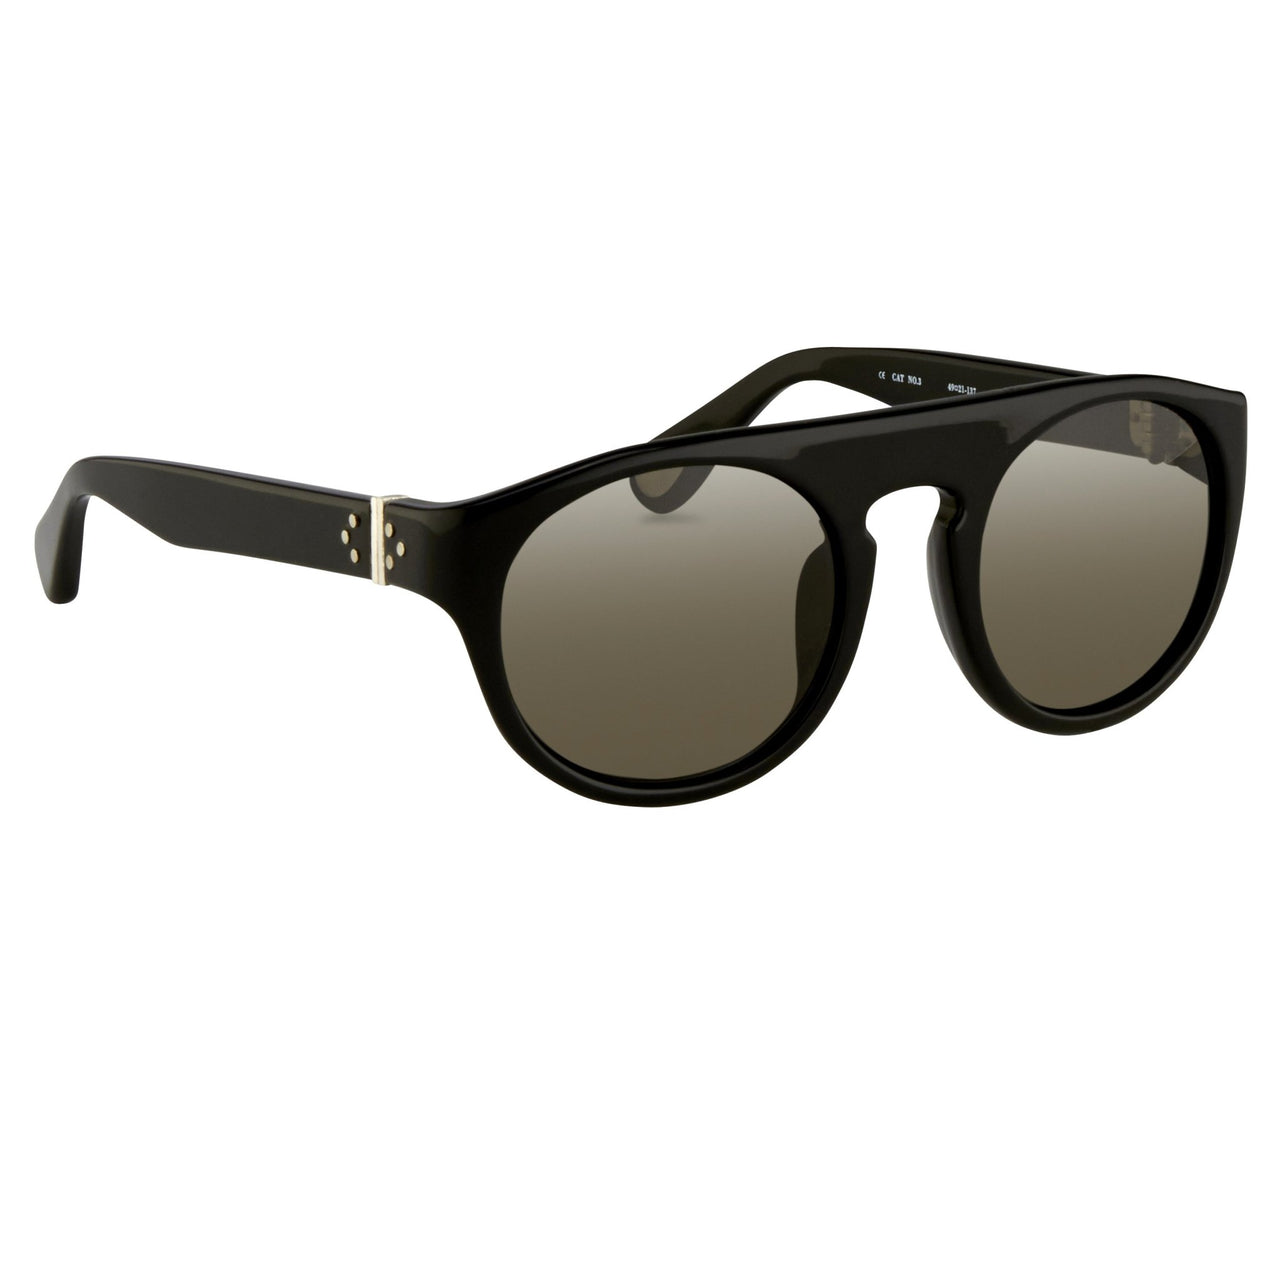 Ann Demeulemeester Sunglasses Flat Top Black 925 Silver with Grey Lenses Category 3 AD10C1SUN - Watches & Crystals